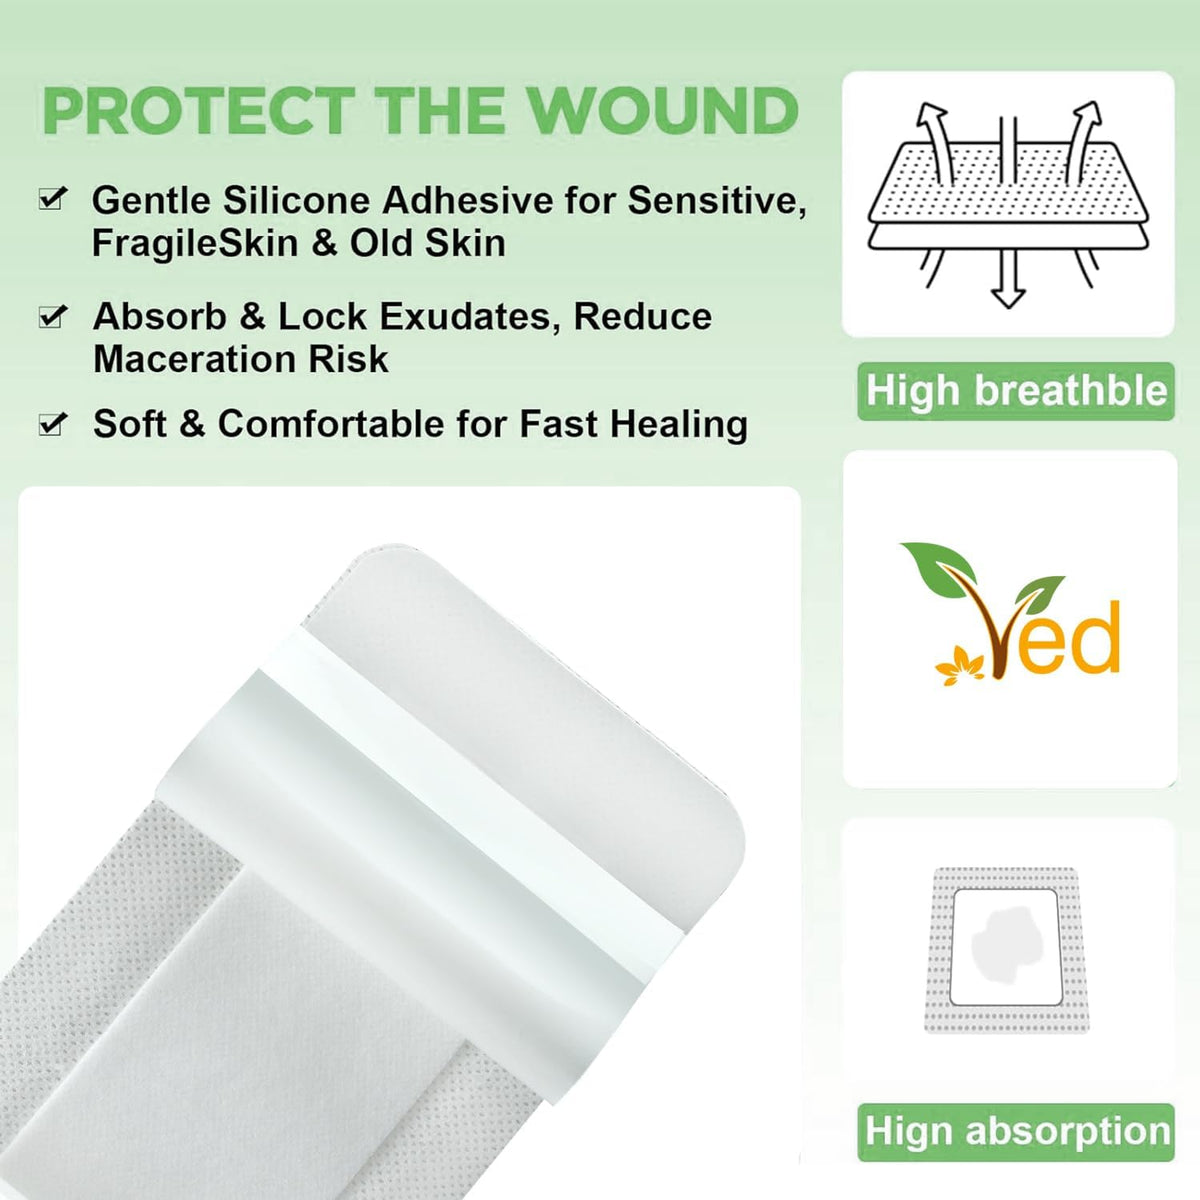 VED Dermapore Adhesive Wound Dressing- Suitable for cuts and grazes, Diabetic Leg ulcers, venous Leg ulcers, Small Pressure sores- Medium, 6 x 7cm (Pack of 25).